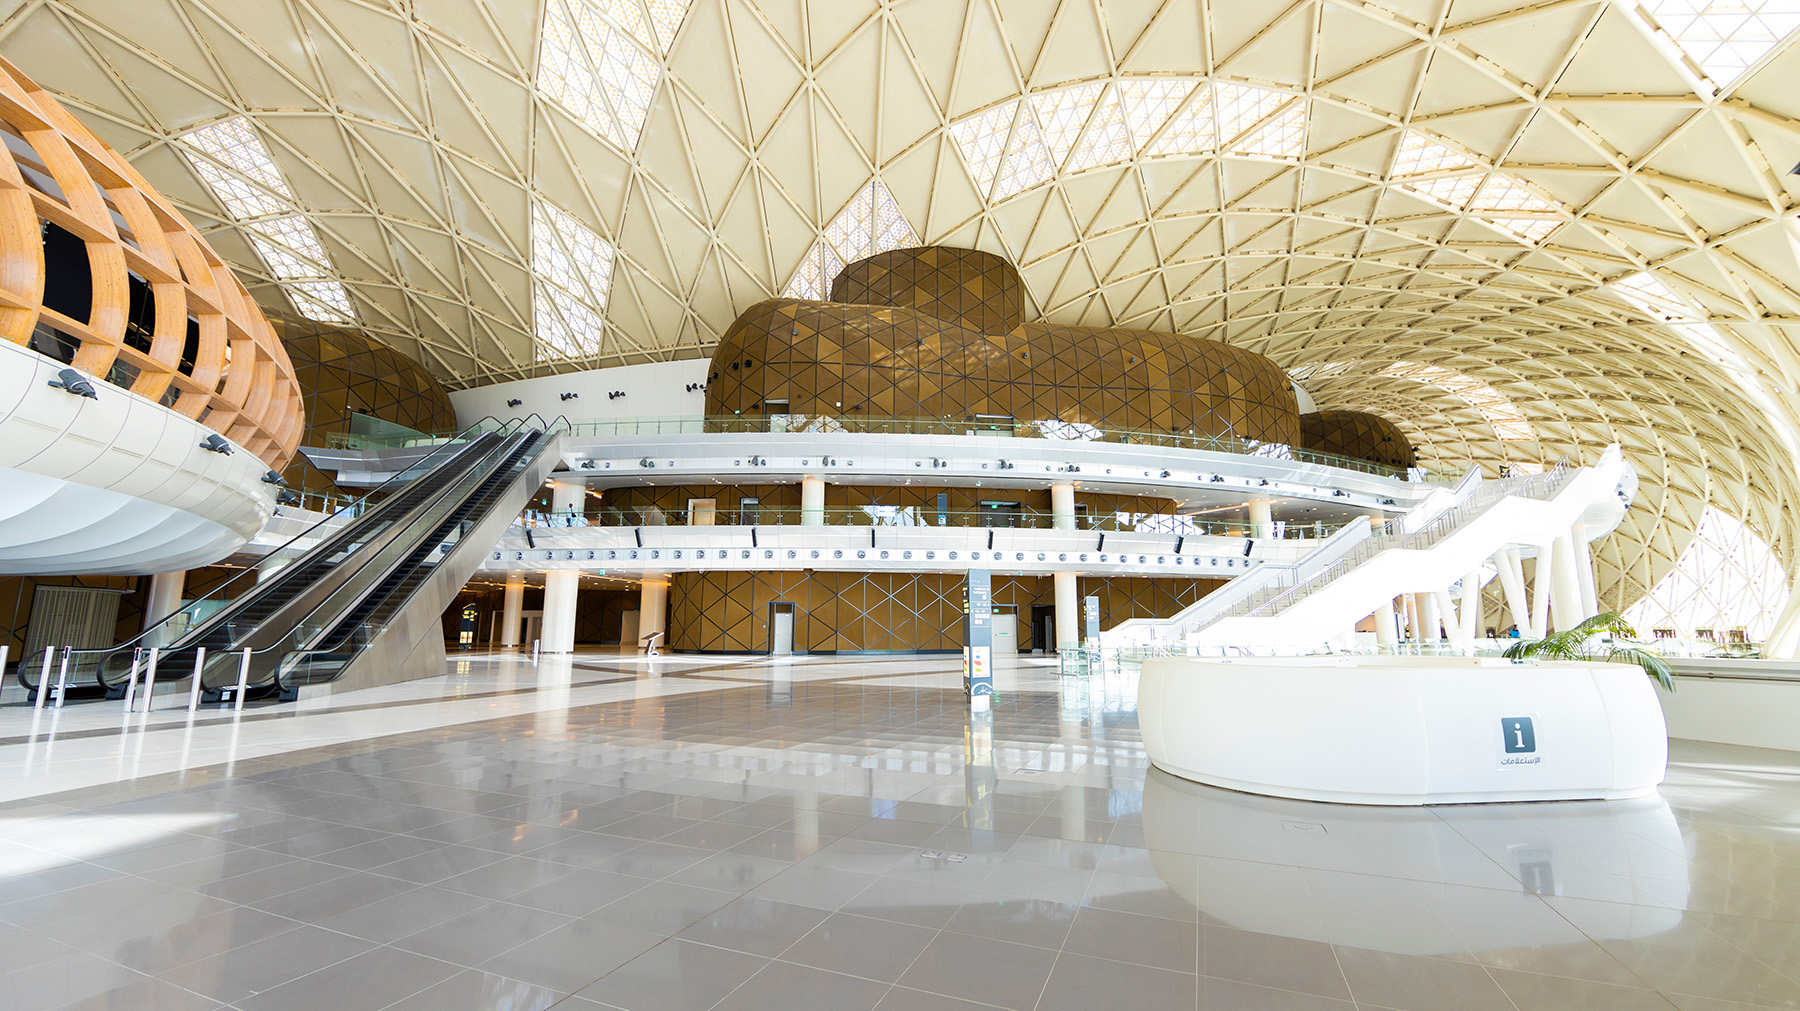 The photograph shows the spacious interior of the Lusail Stadium, which will be repurposed for multiple community uses. 